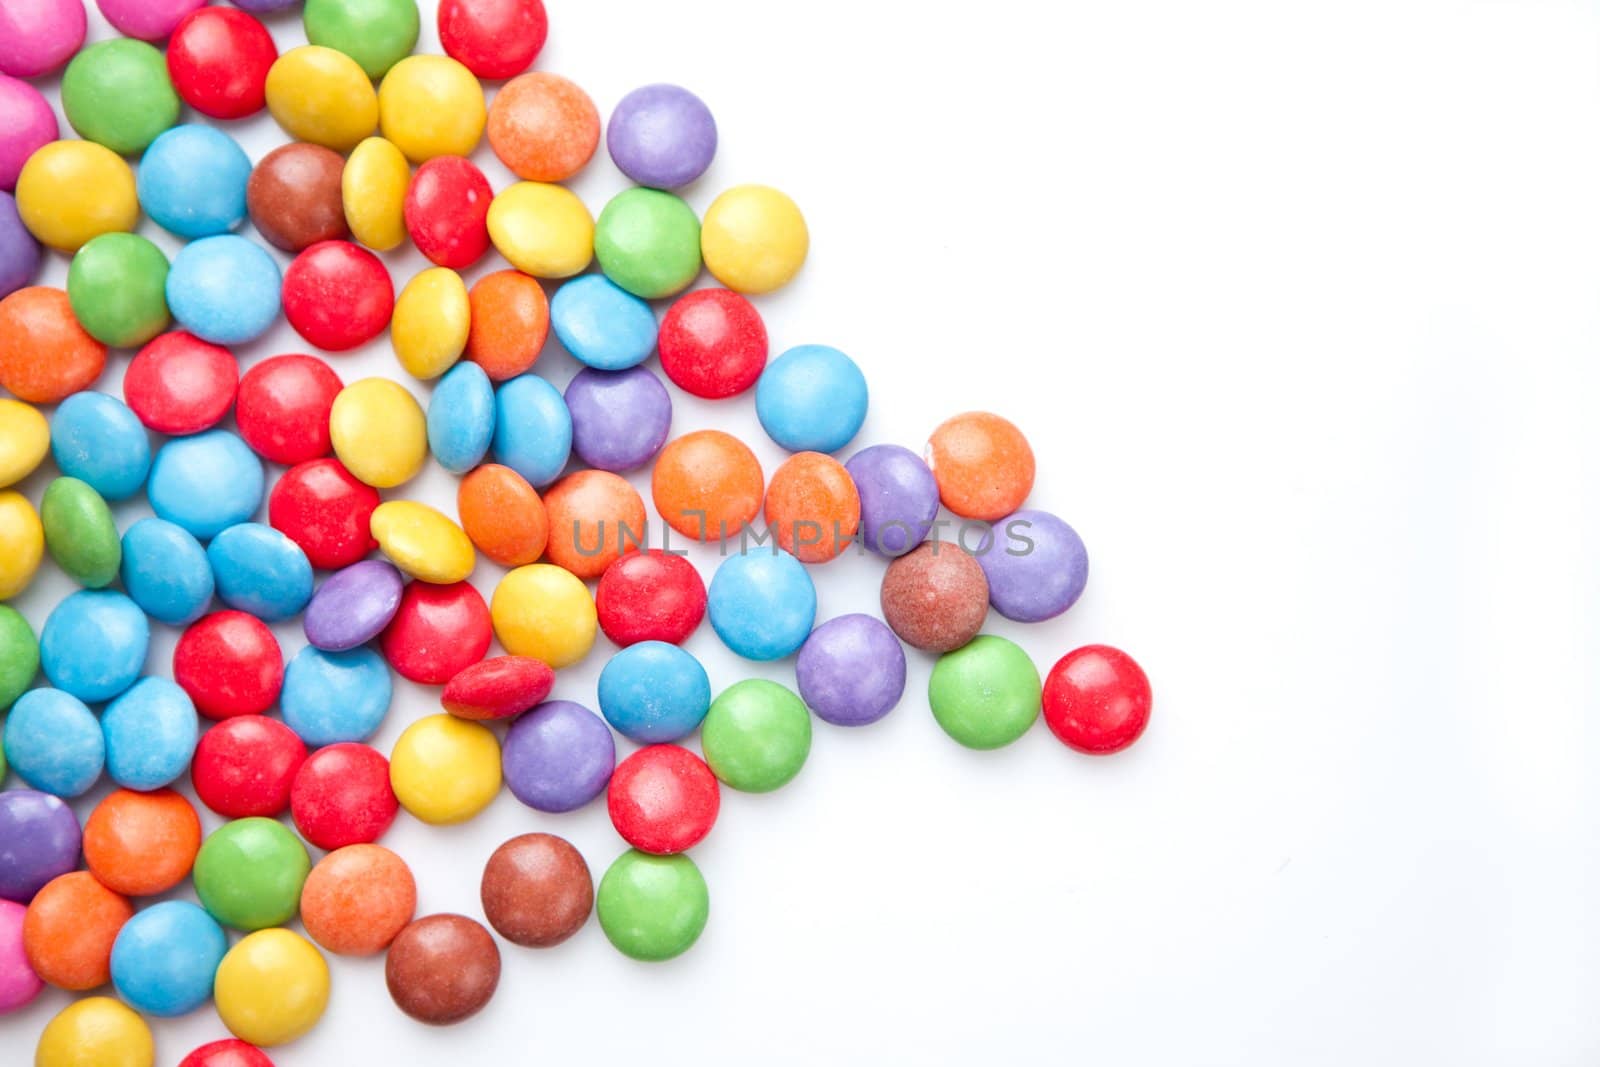 Heap of candies multi coloured against a white background